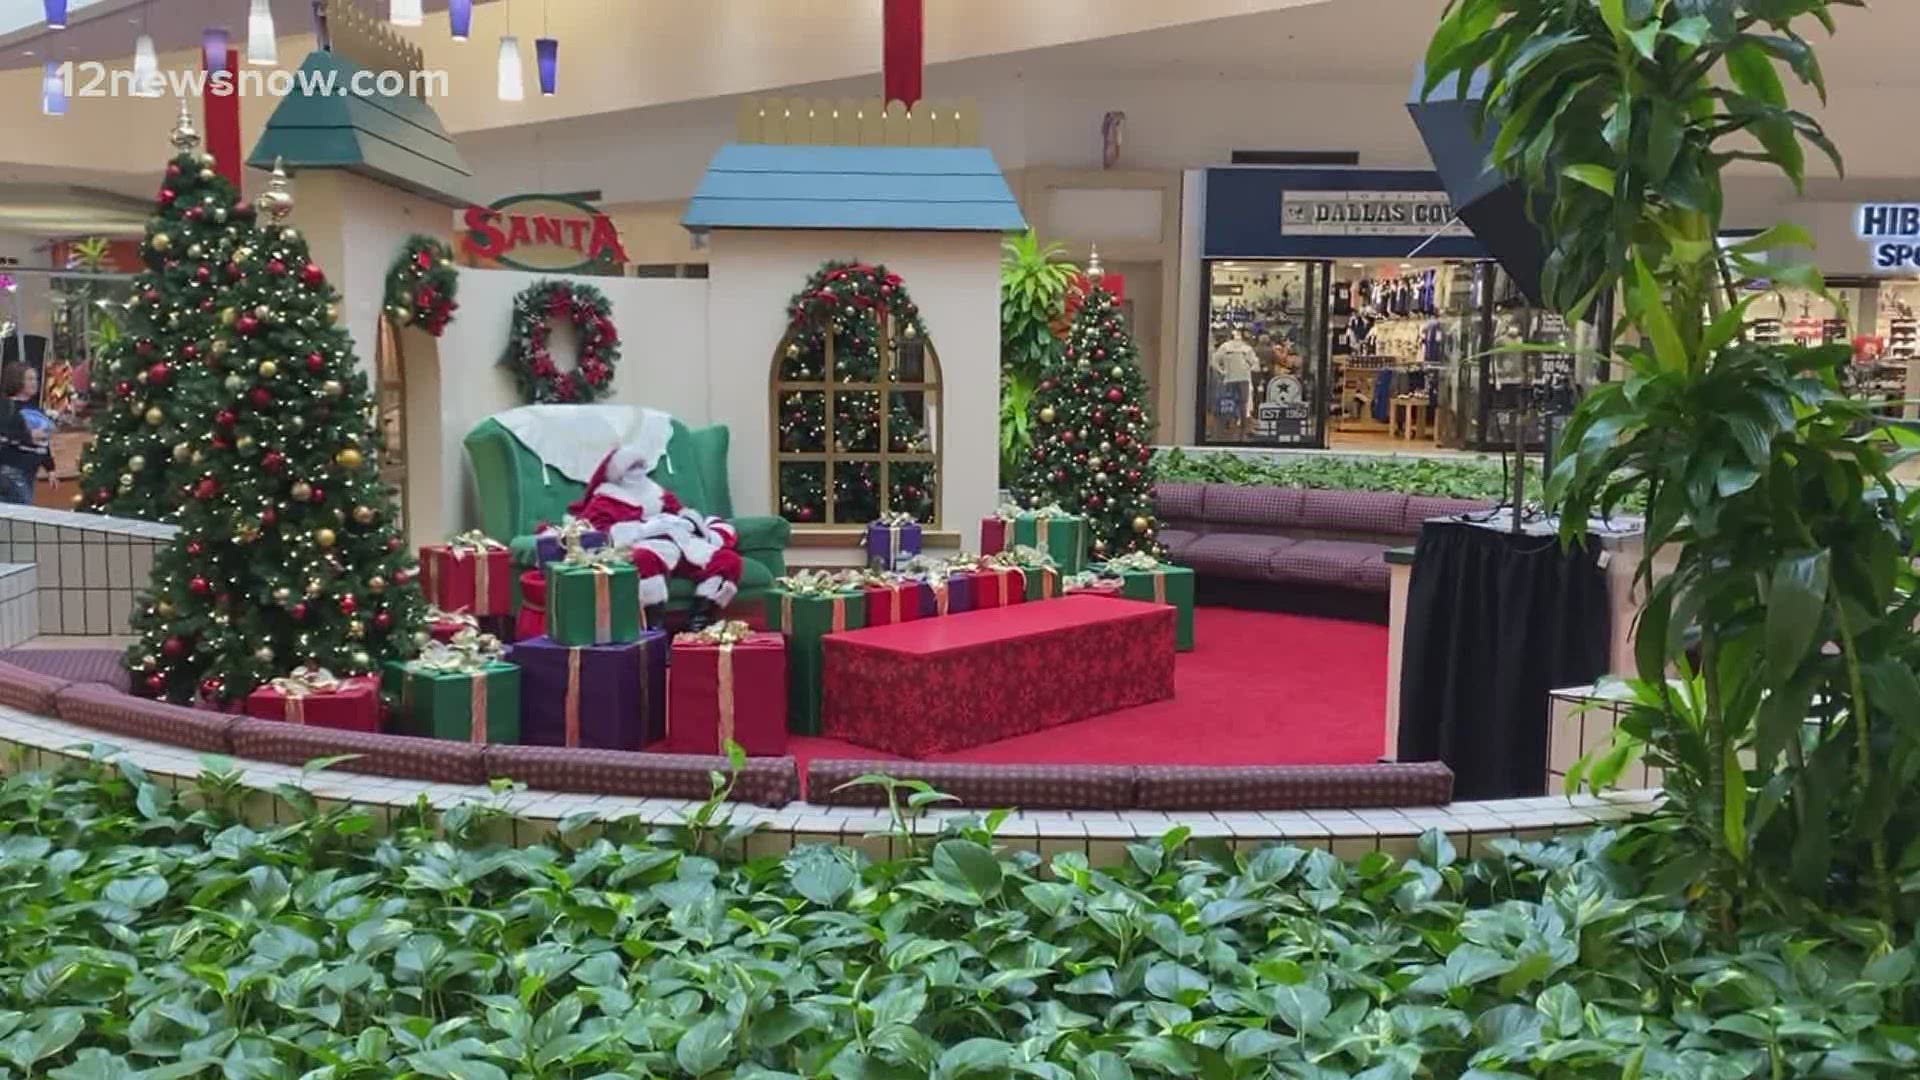 Santa Claus is back at Parkdale Mall to hear children's Christmas lists while following new social distancing requirements.